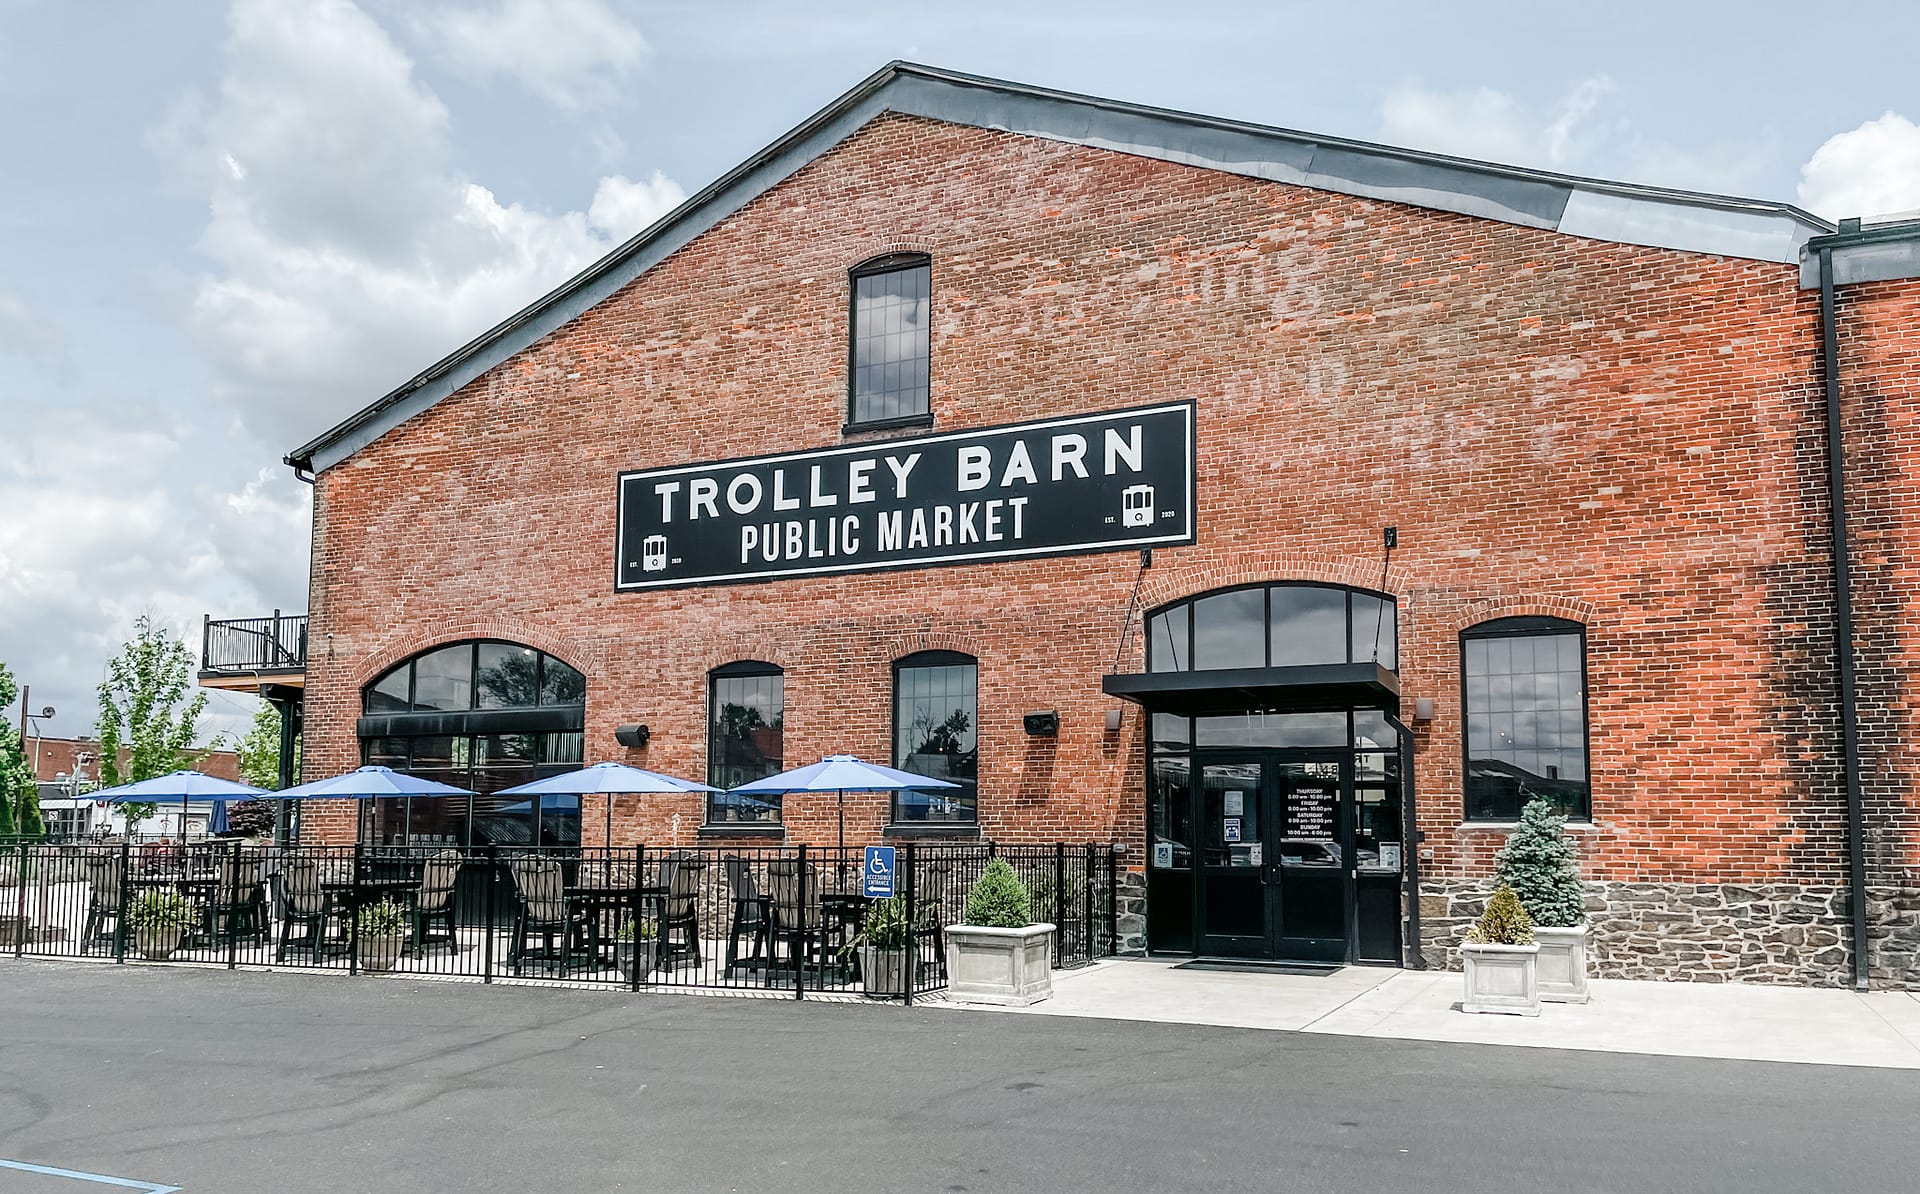 Exterior of the Trolley Barn Public Market